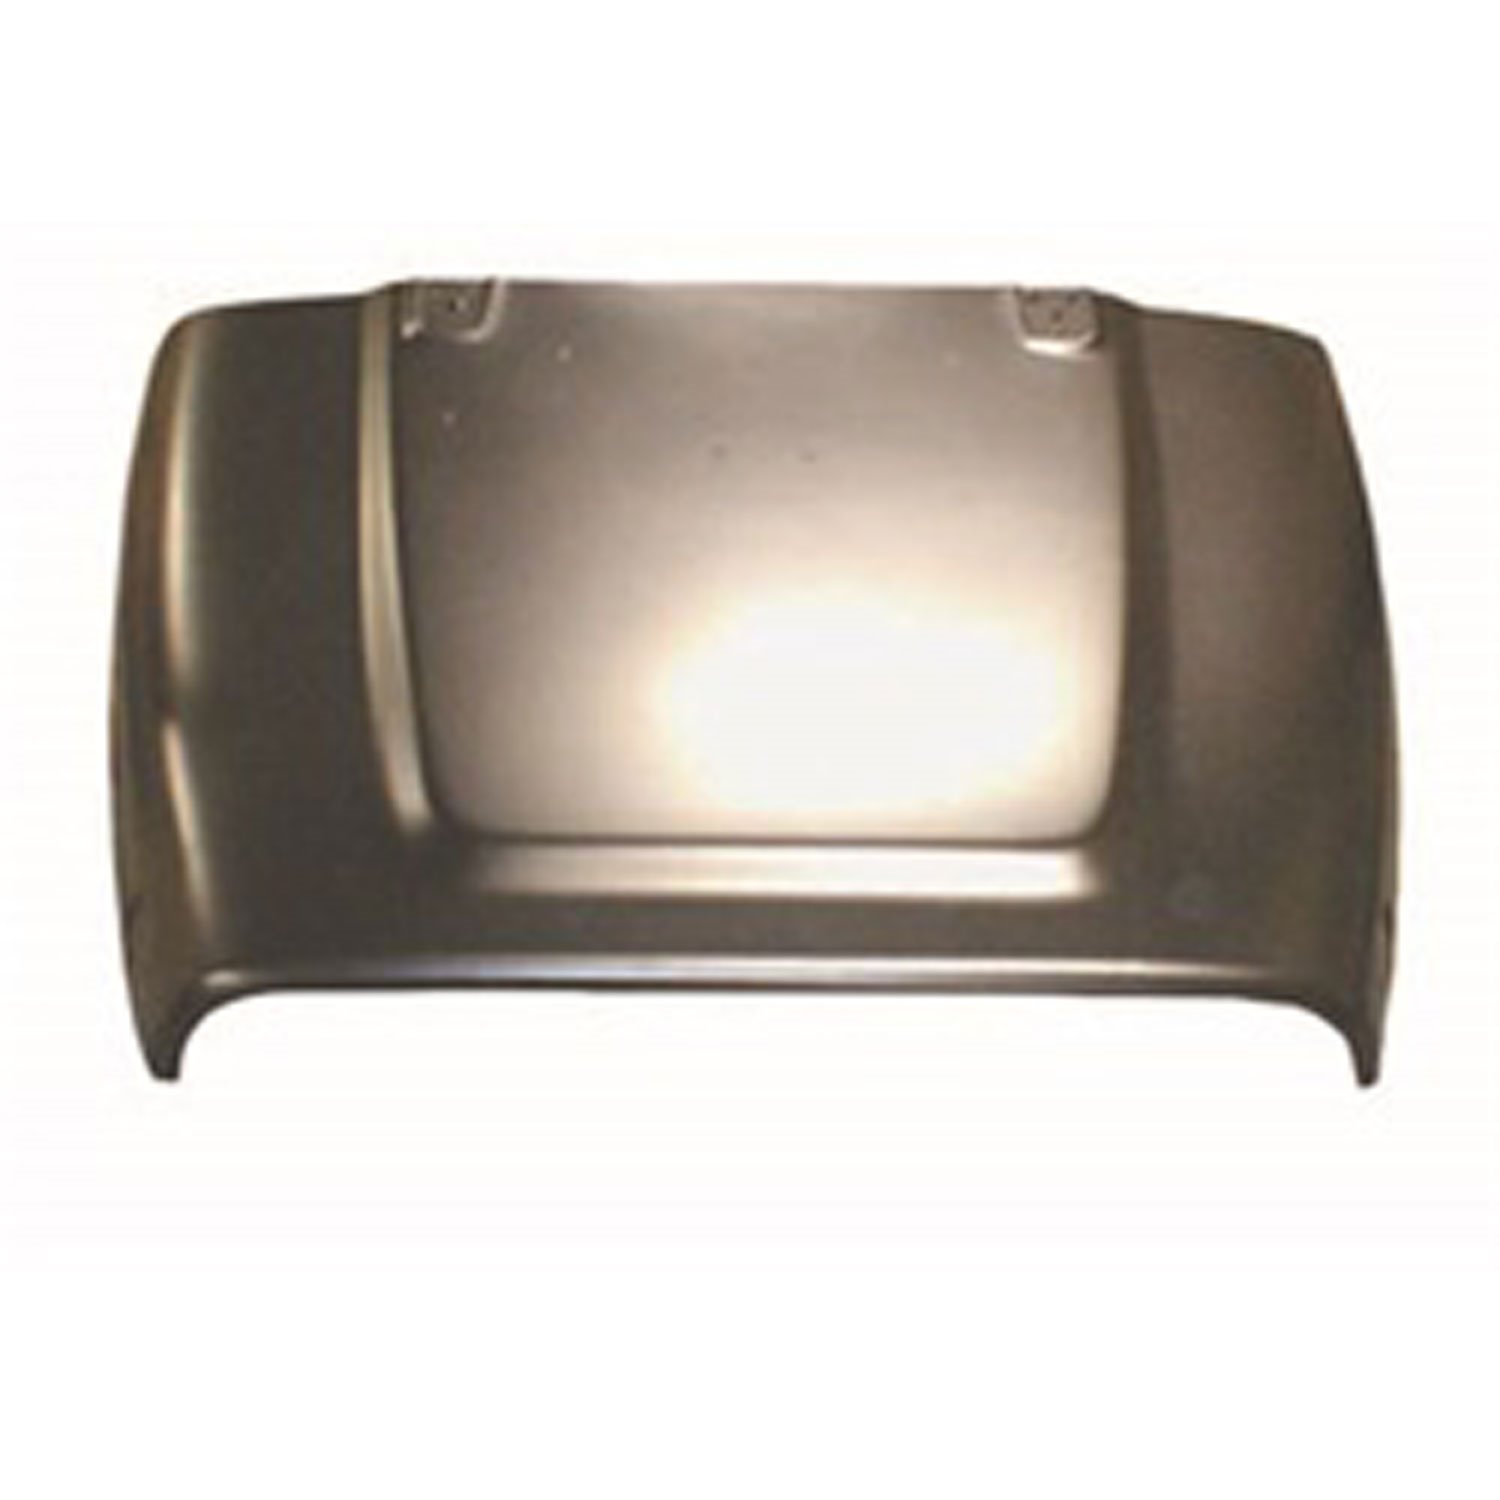 Steel replacement hood from Omix-ADA, Fits 98-00 TJ Wrangler built before February 07 2000 with